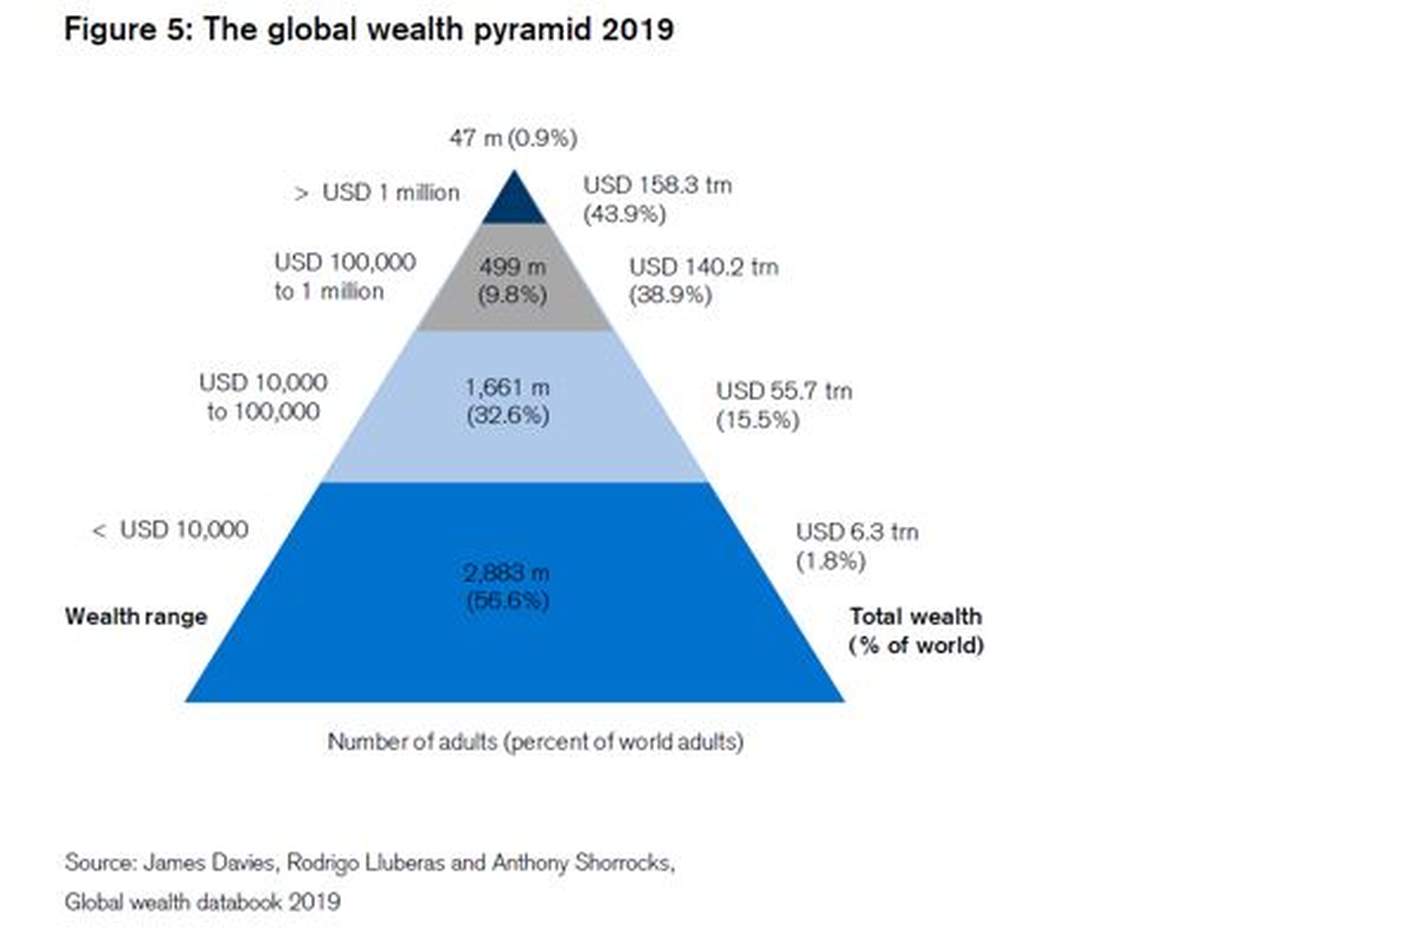 https://cdnext.credit-suisse.com/about-us-news/en/articles/media-releases/global-wealth-report-2019--global-wealth-rises-by-2-6--driven-by-201910/_jcr_content/content/image/image.revampimg.1428.medium.jpg/191017-gwr2019-publisher.JPG